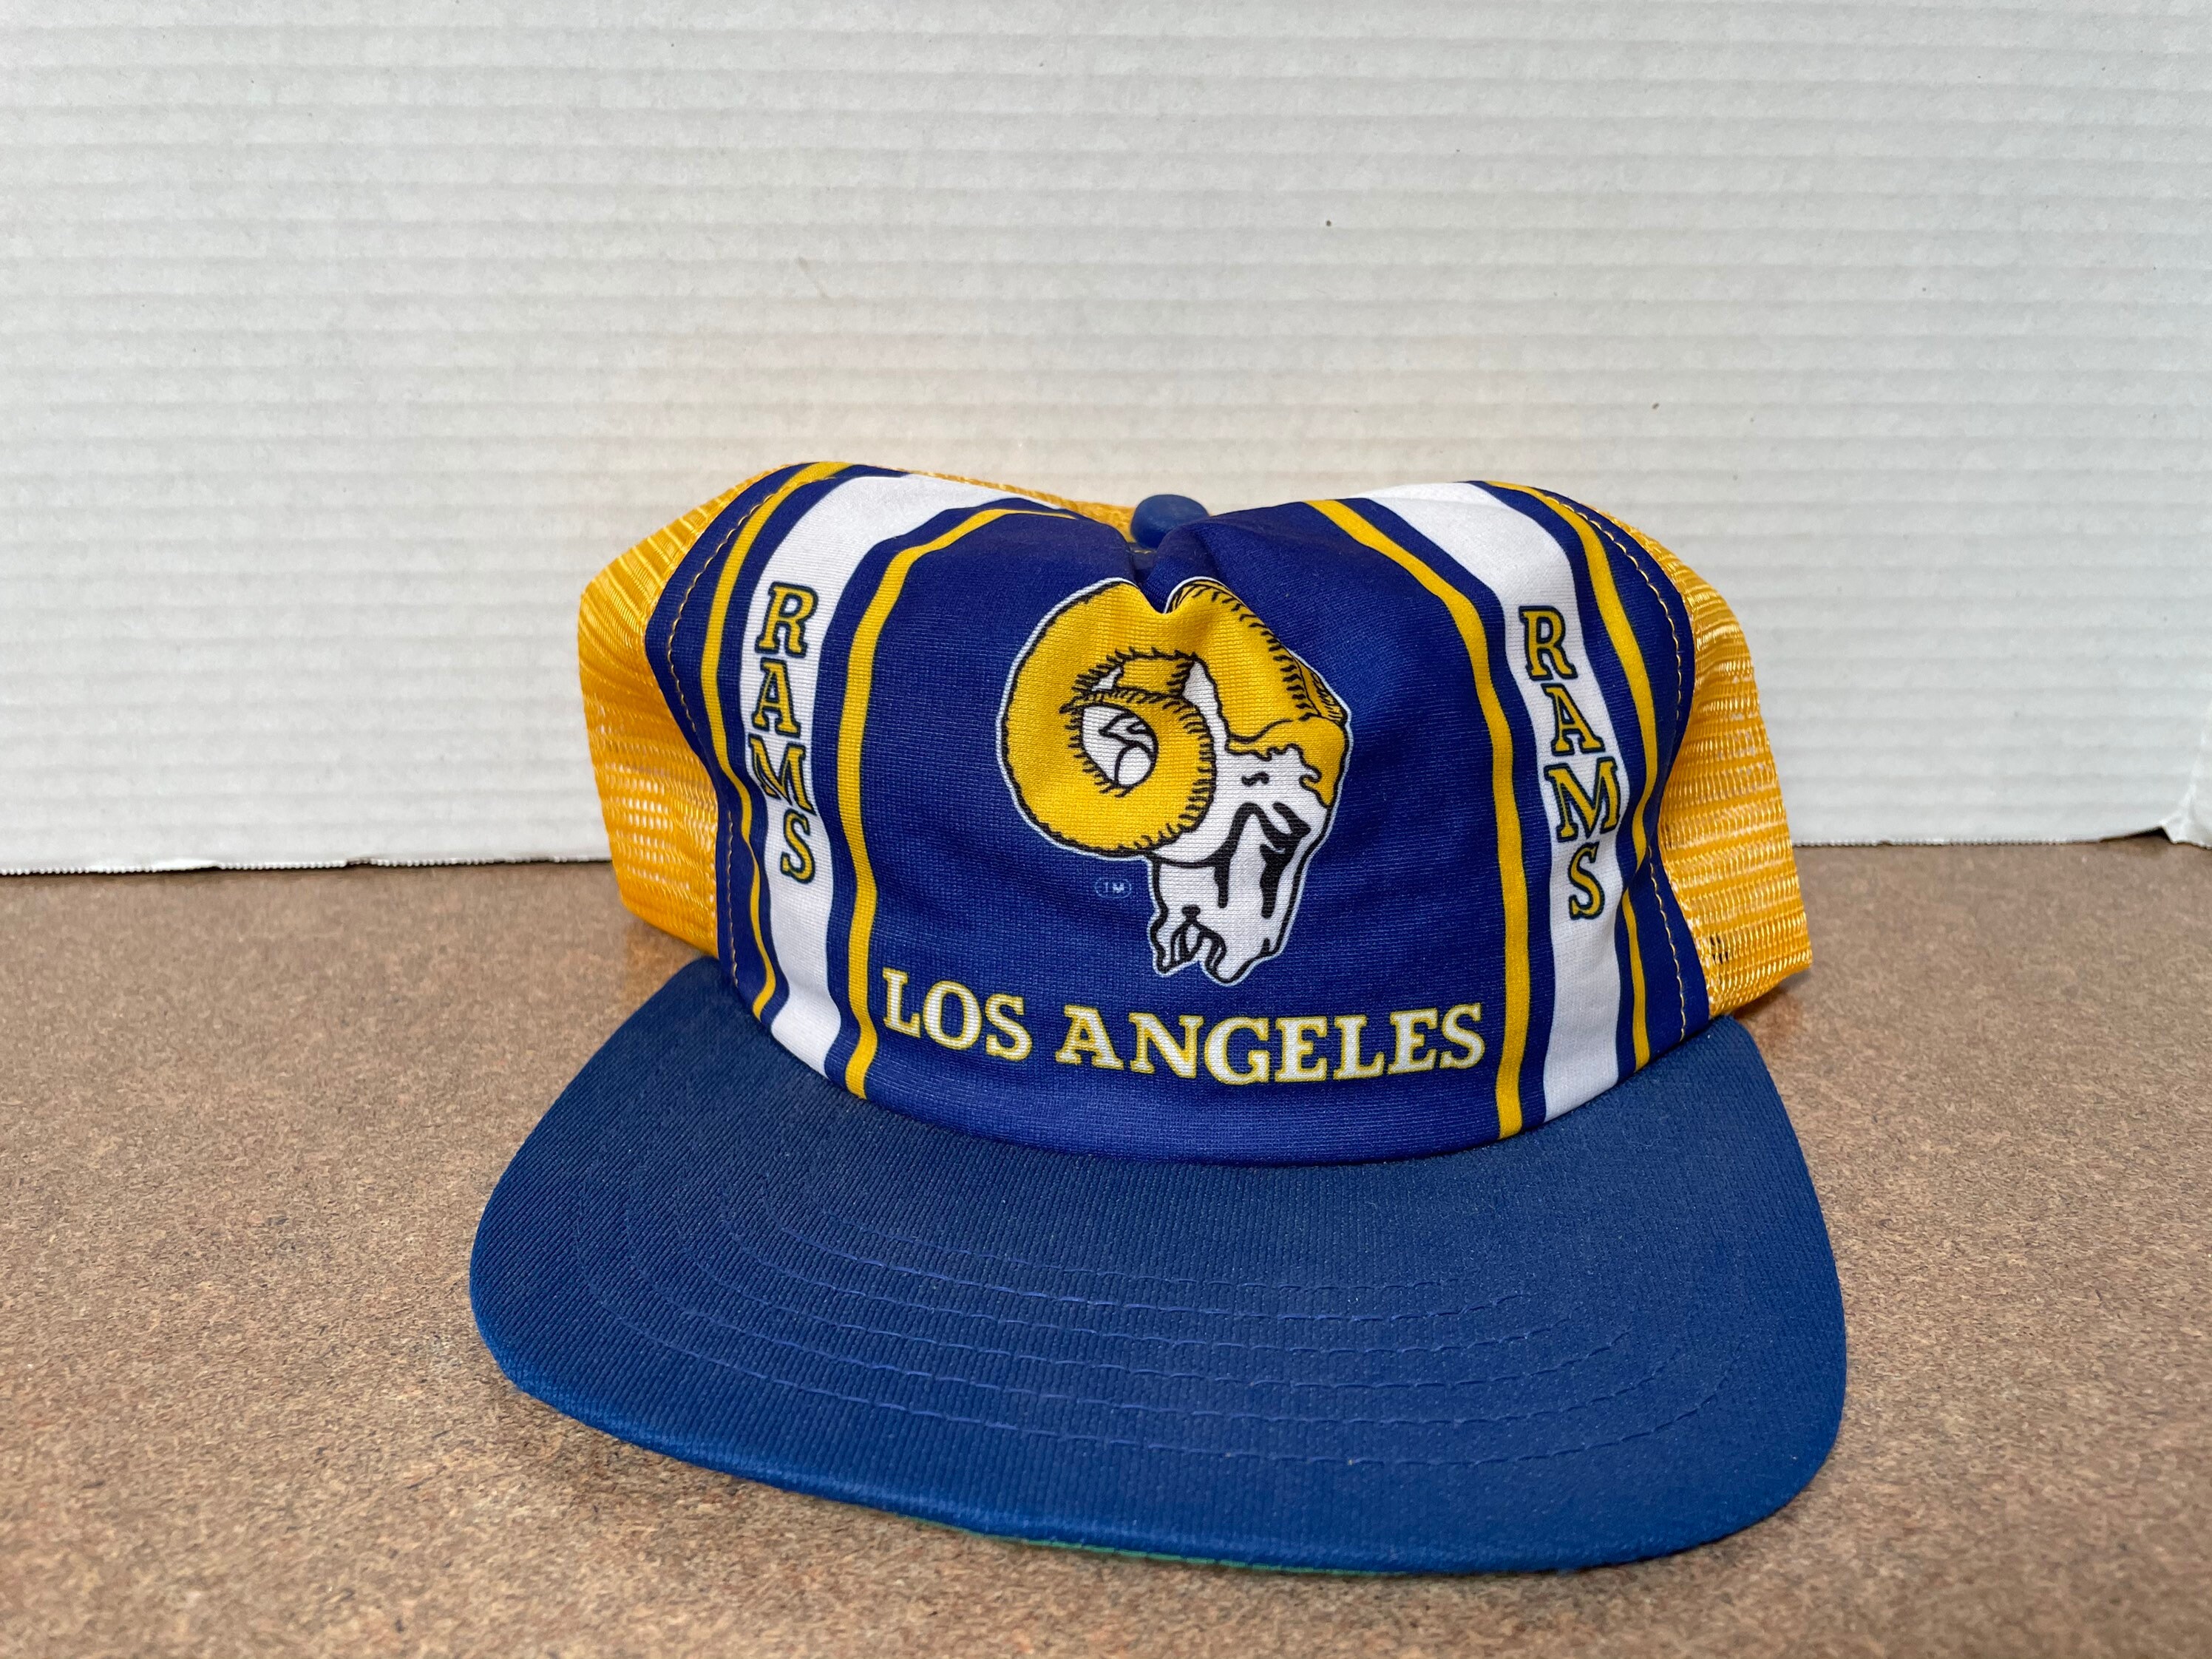 Vintage La Rams Hat Blue Yellow Snapback Trucker Mesh New Era 80's One Size Made in Usa